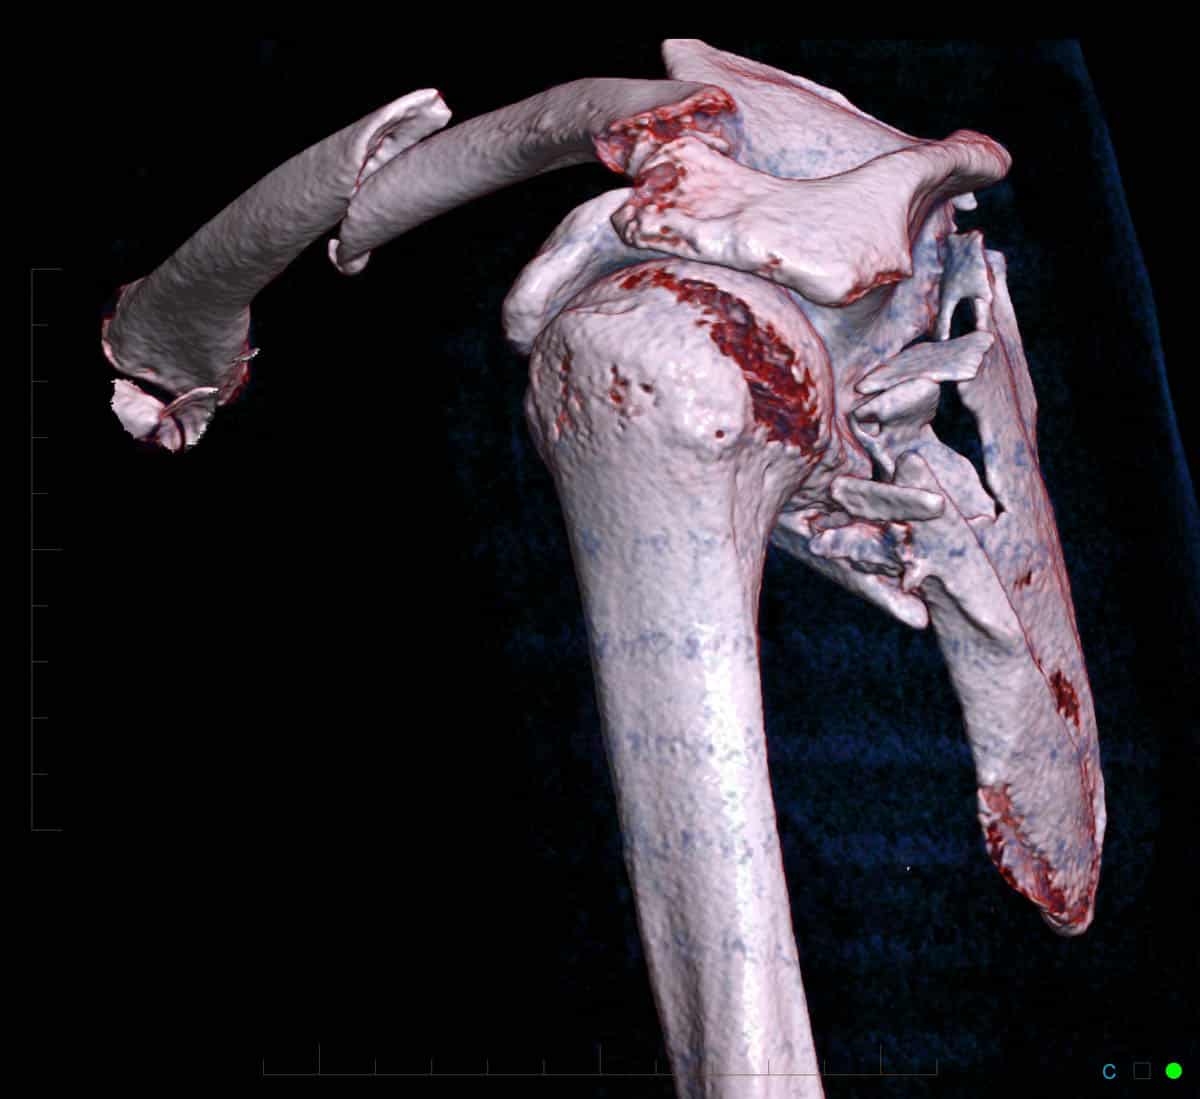 3. CT clavicle and scapula blade fracture with the source image (1) showing the clavicle fracture and the 3D images (2 & 3) showing the clavicle and the shoulder blade fracture